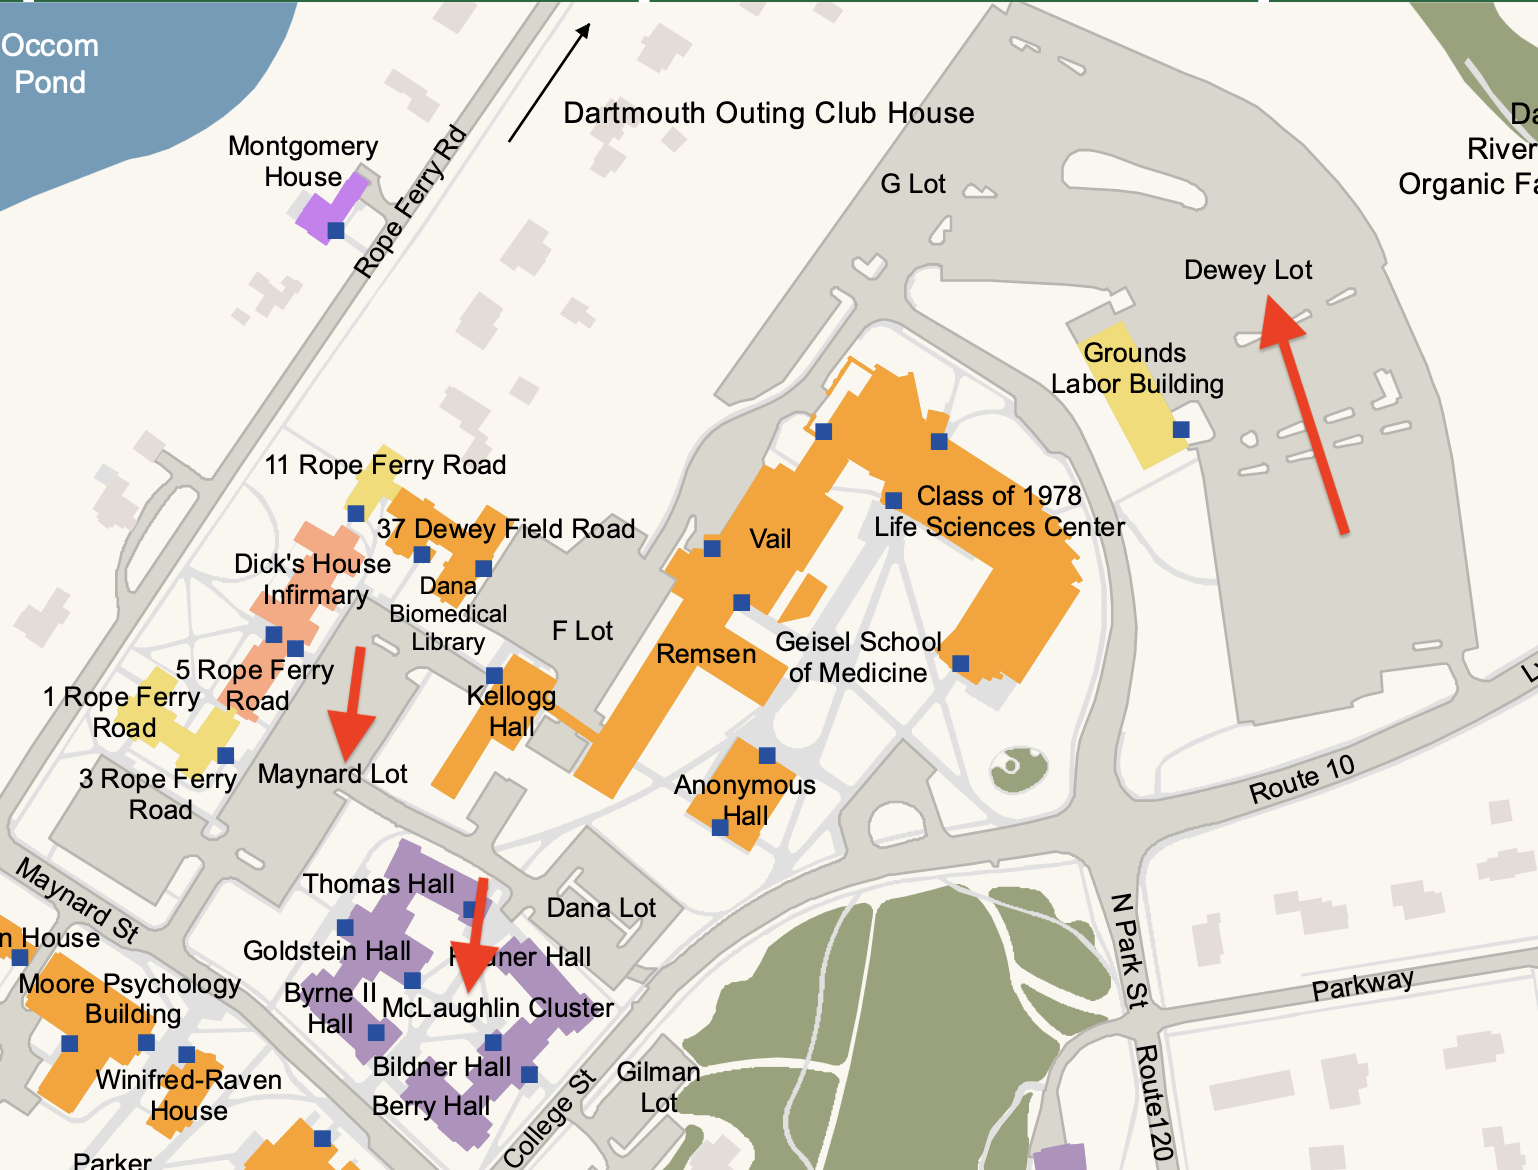 Map of parking for reunion